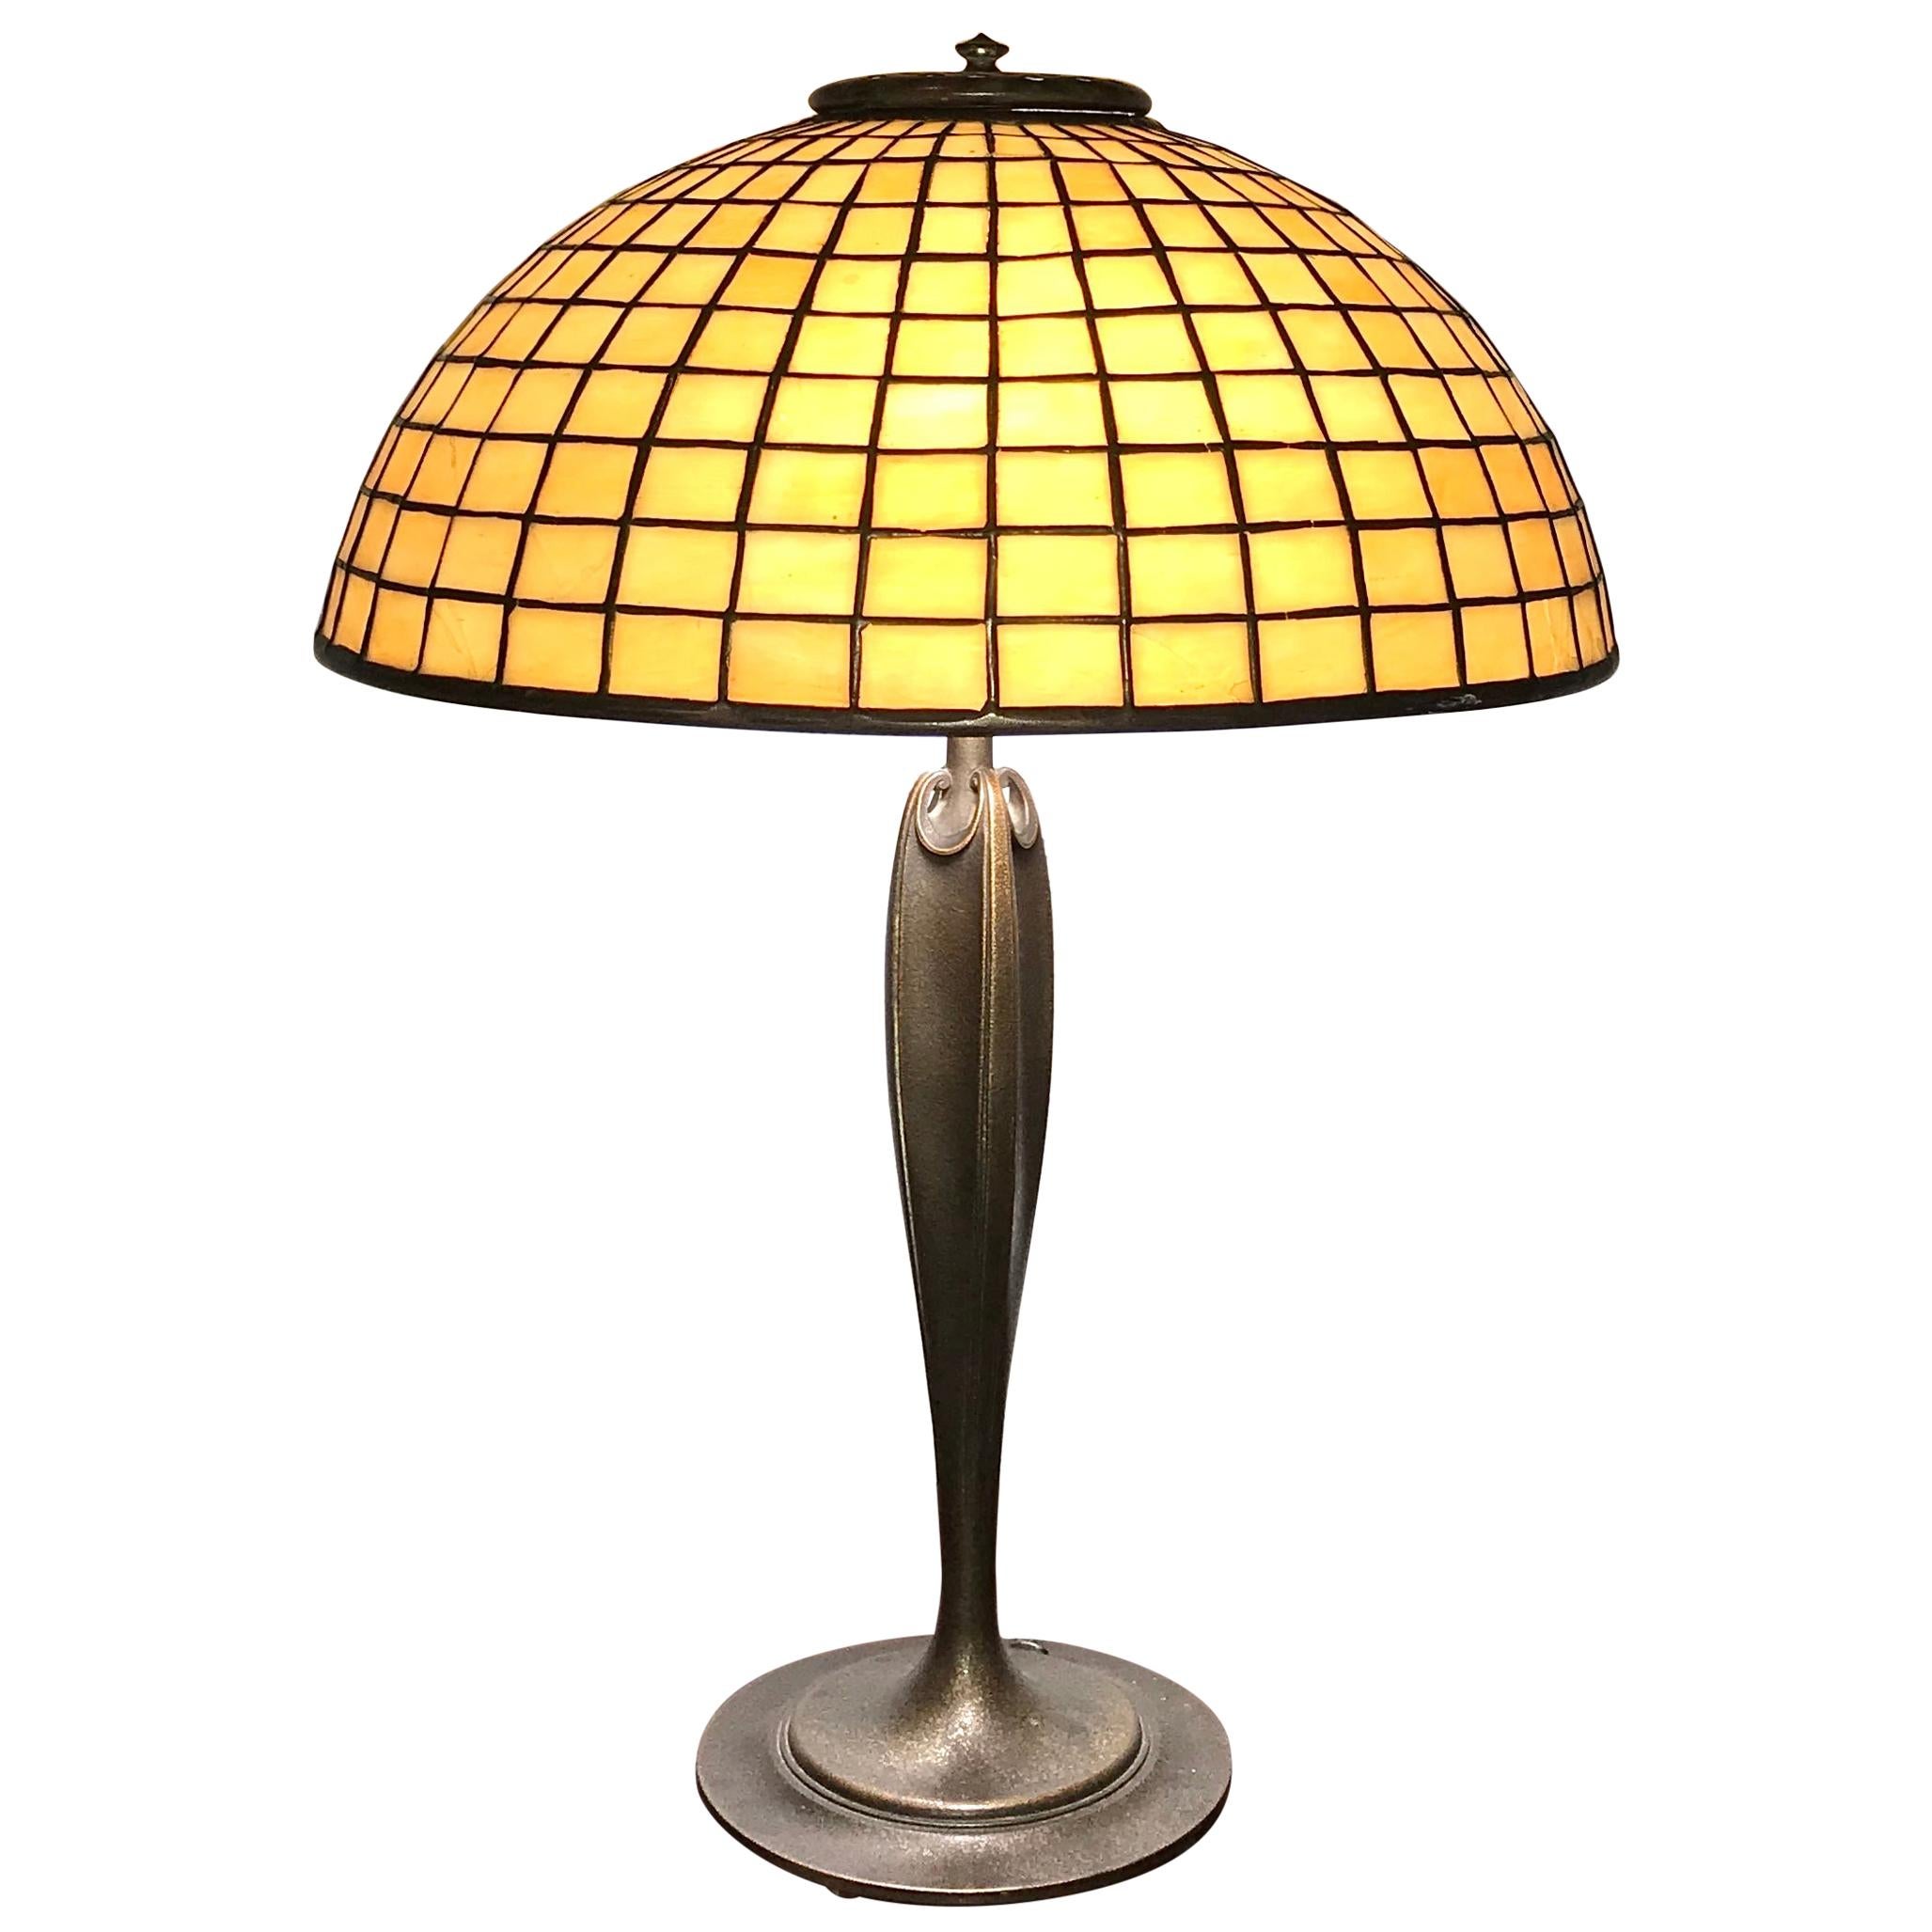 Tiffany Studios Geometric Stained Glass and Bronze Table Lamp